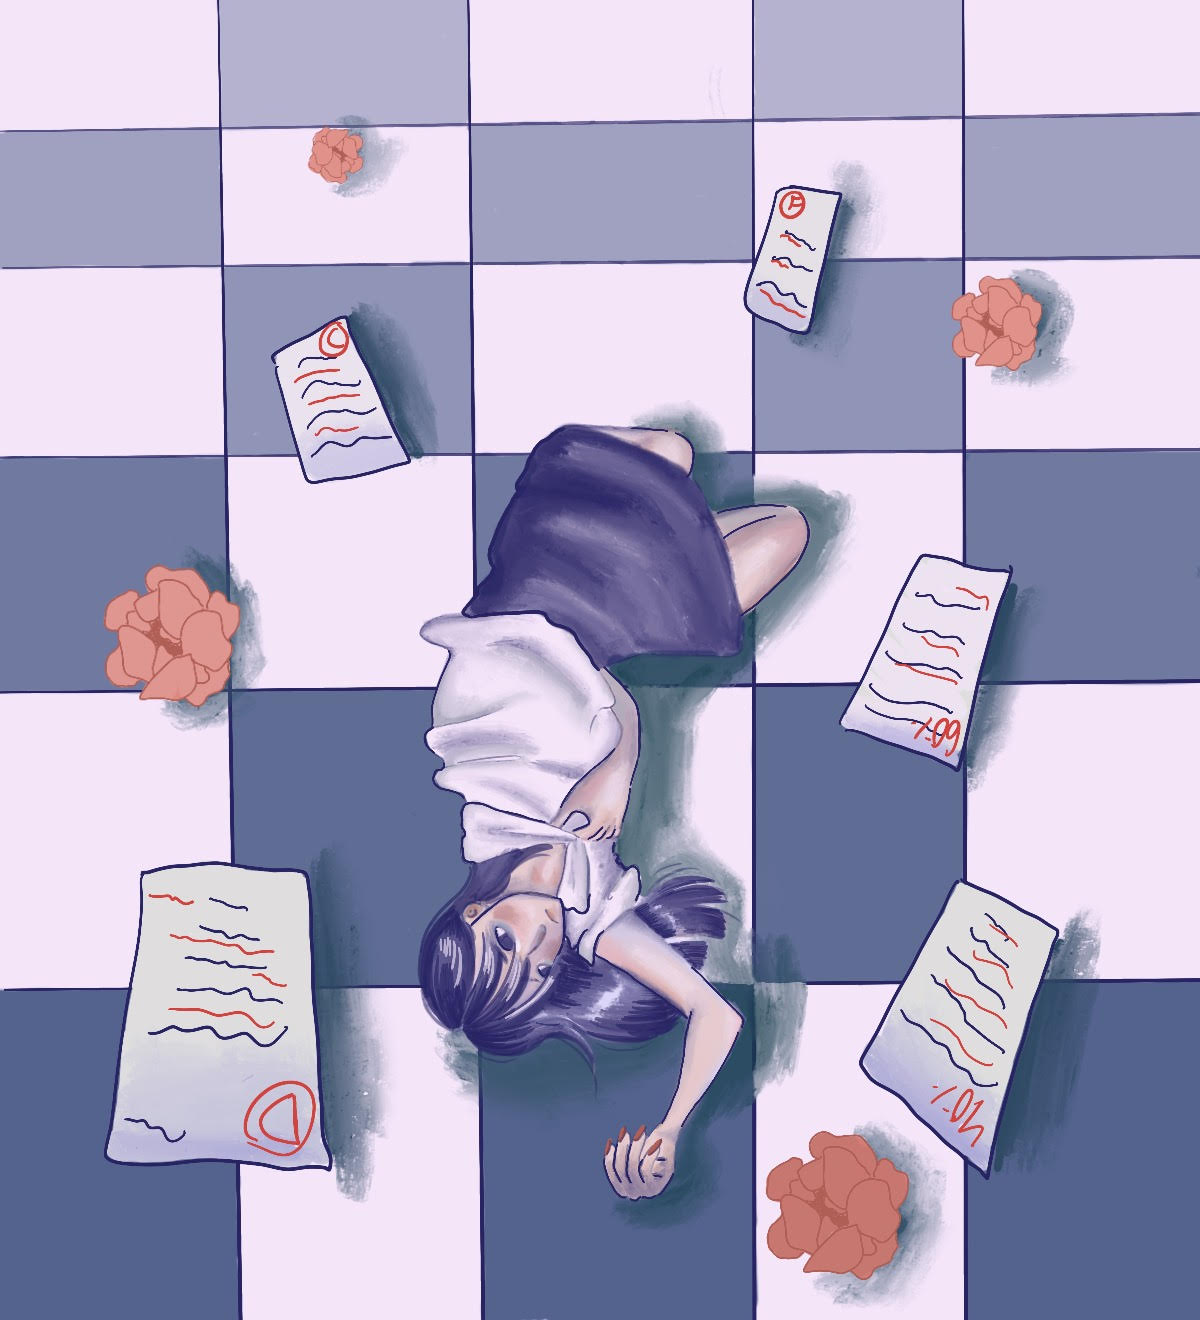 A teenager in a high school uniform lies on the floor, overwhelmed by test papers around her marked with red pen ink.